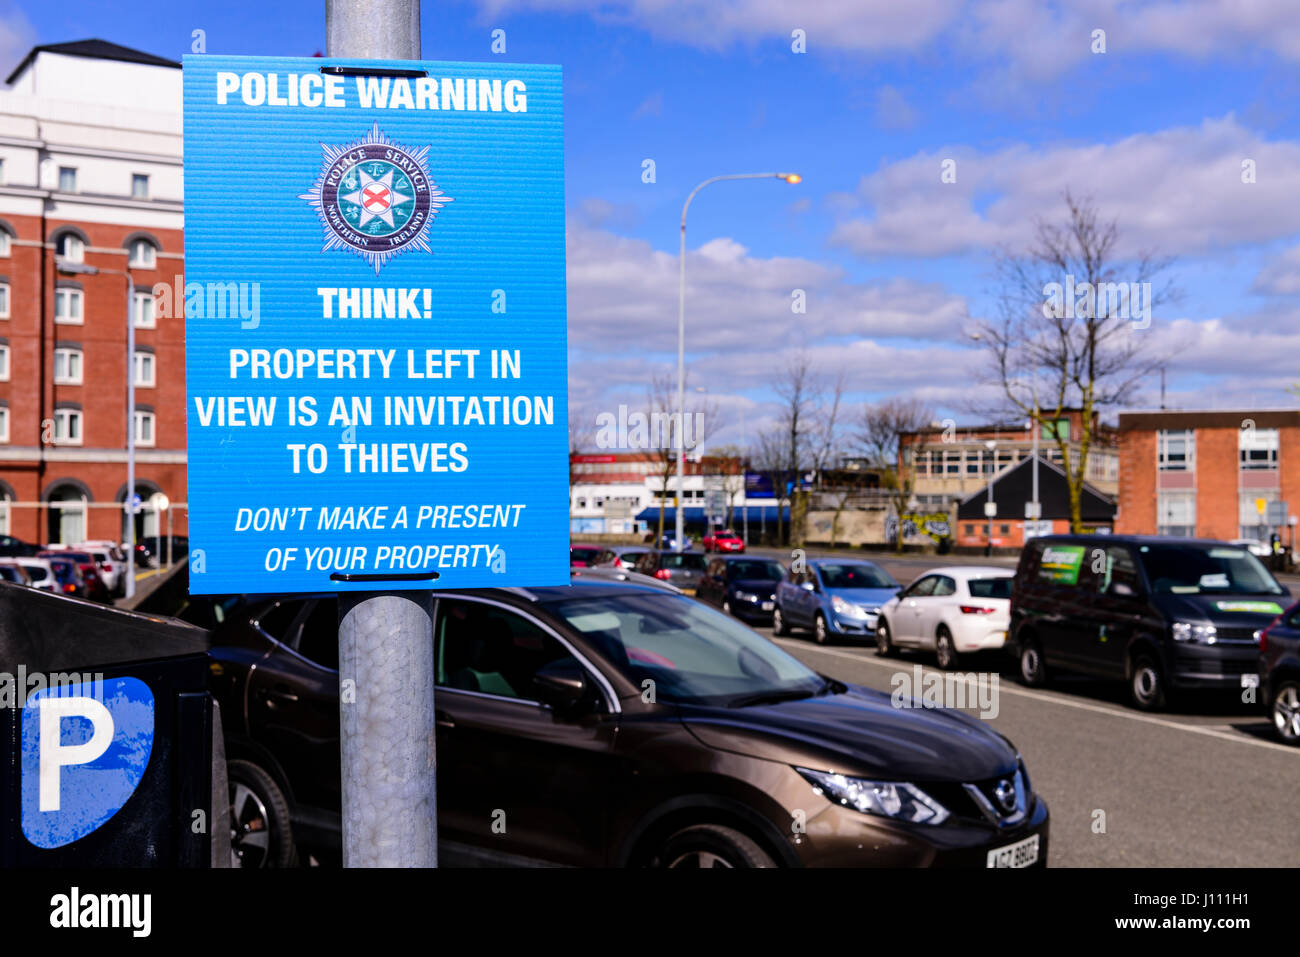 Sign at a car park placed by the PSNI 'Police Warning. Think! Property left in view is an invitation to thieves. Don't make a present of your property. Stock Photo